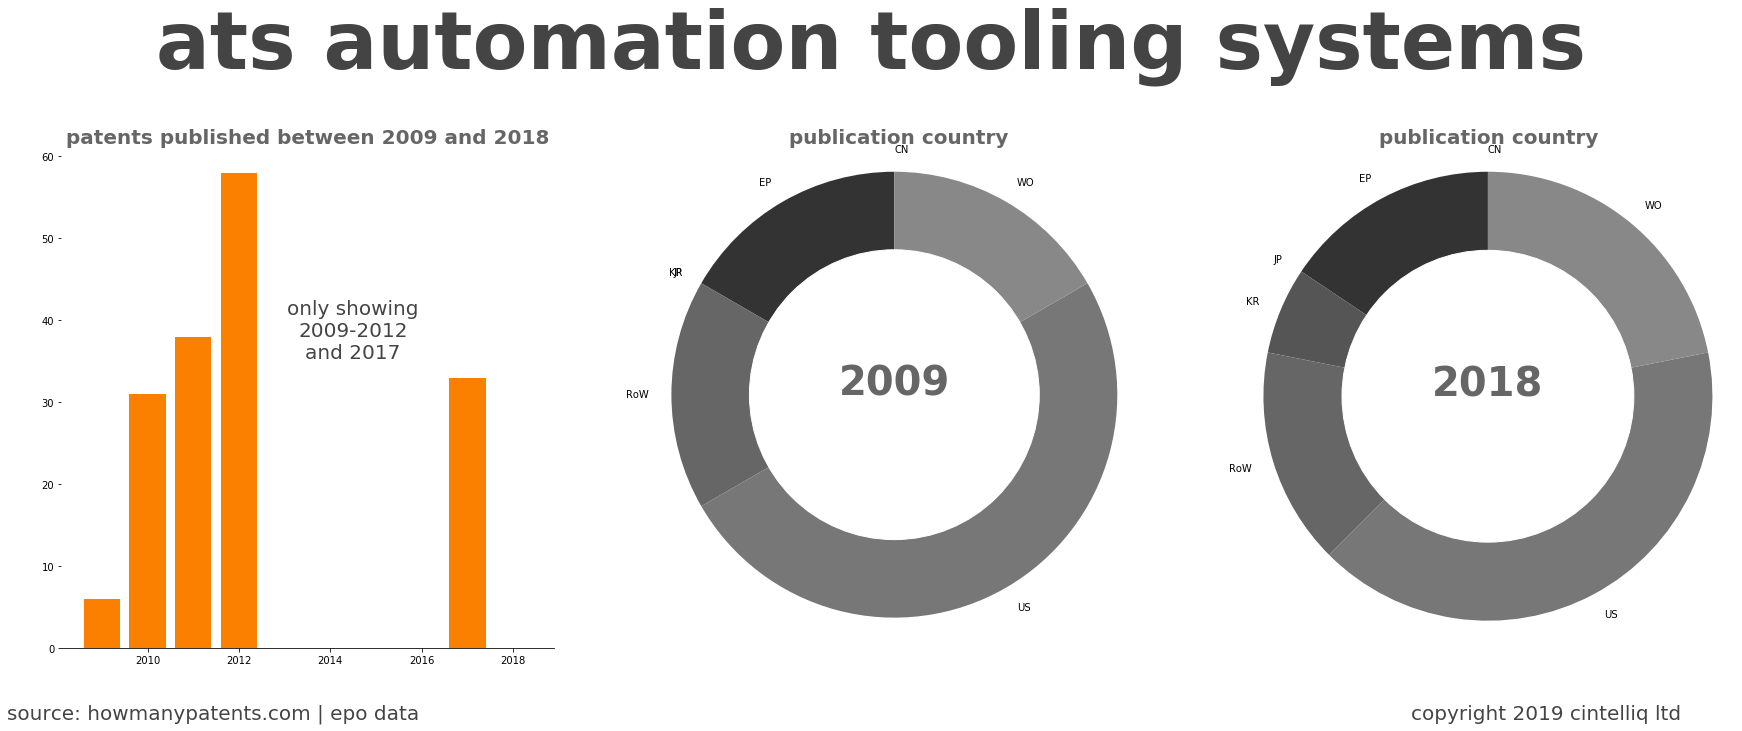 summary of patents for Ats Automation Tooling Systems